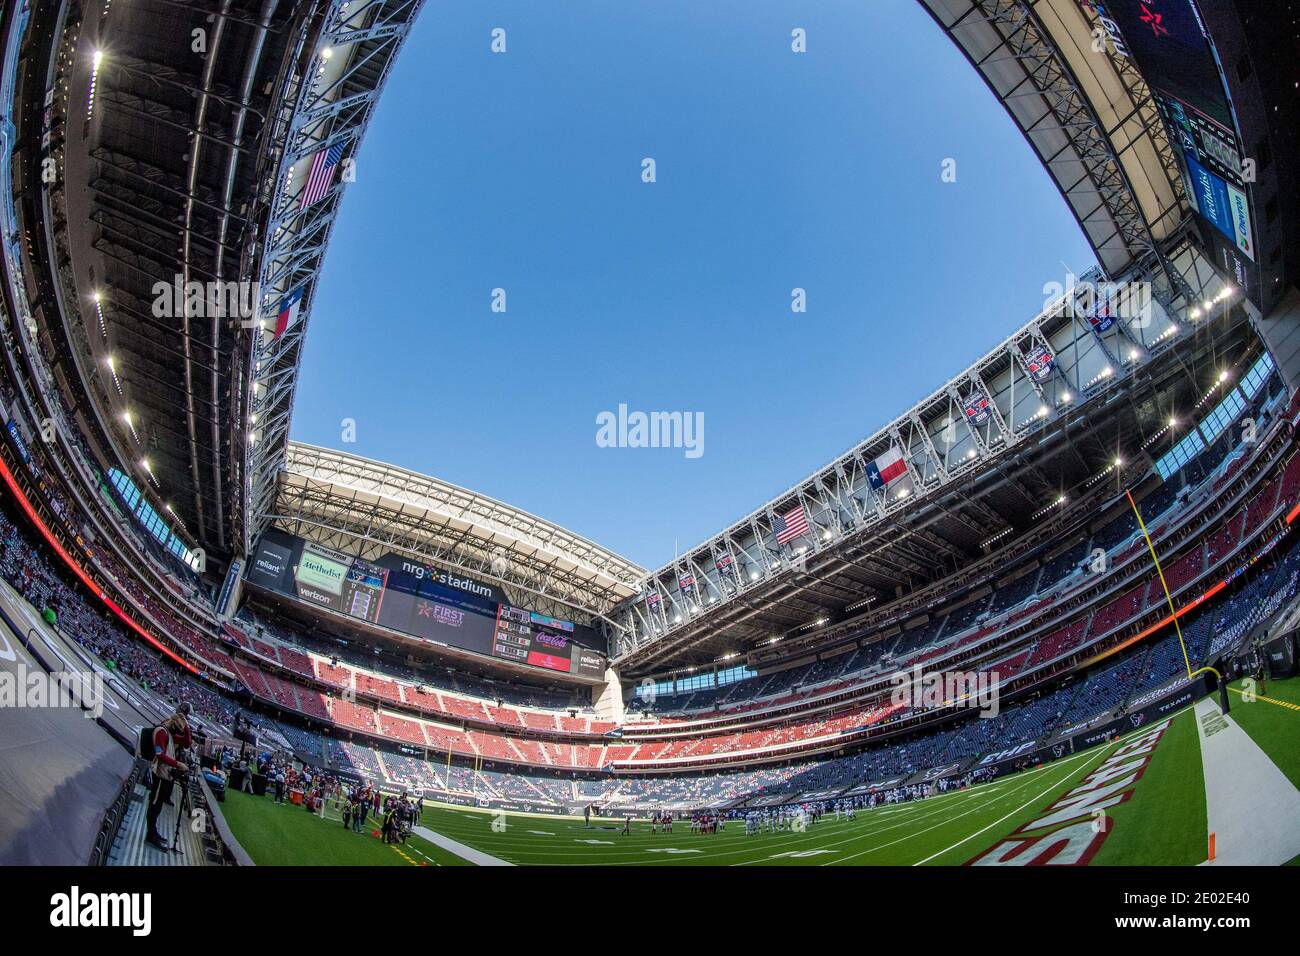 Houston, TX, USA. 6th Dec, 2020. A general view of NRG Stadium with the  roof open during the 2nd quarter of an NFL football game between the  Indianapolis Colts and the Houston